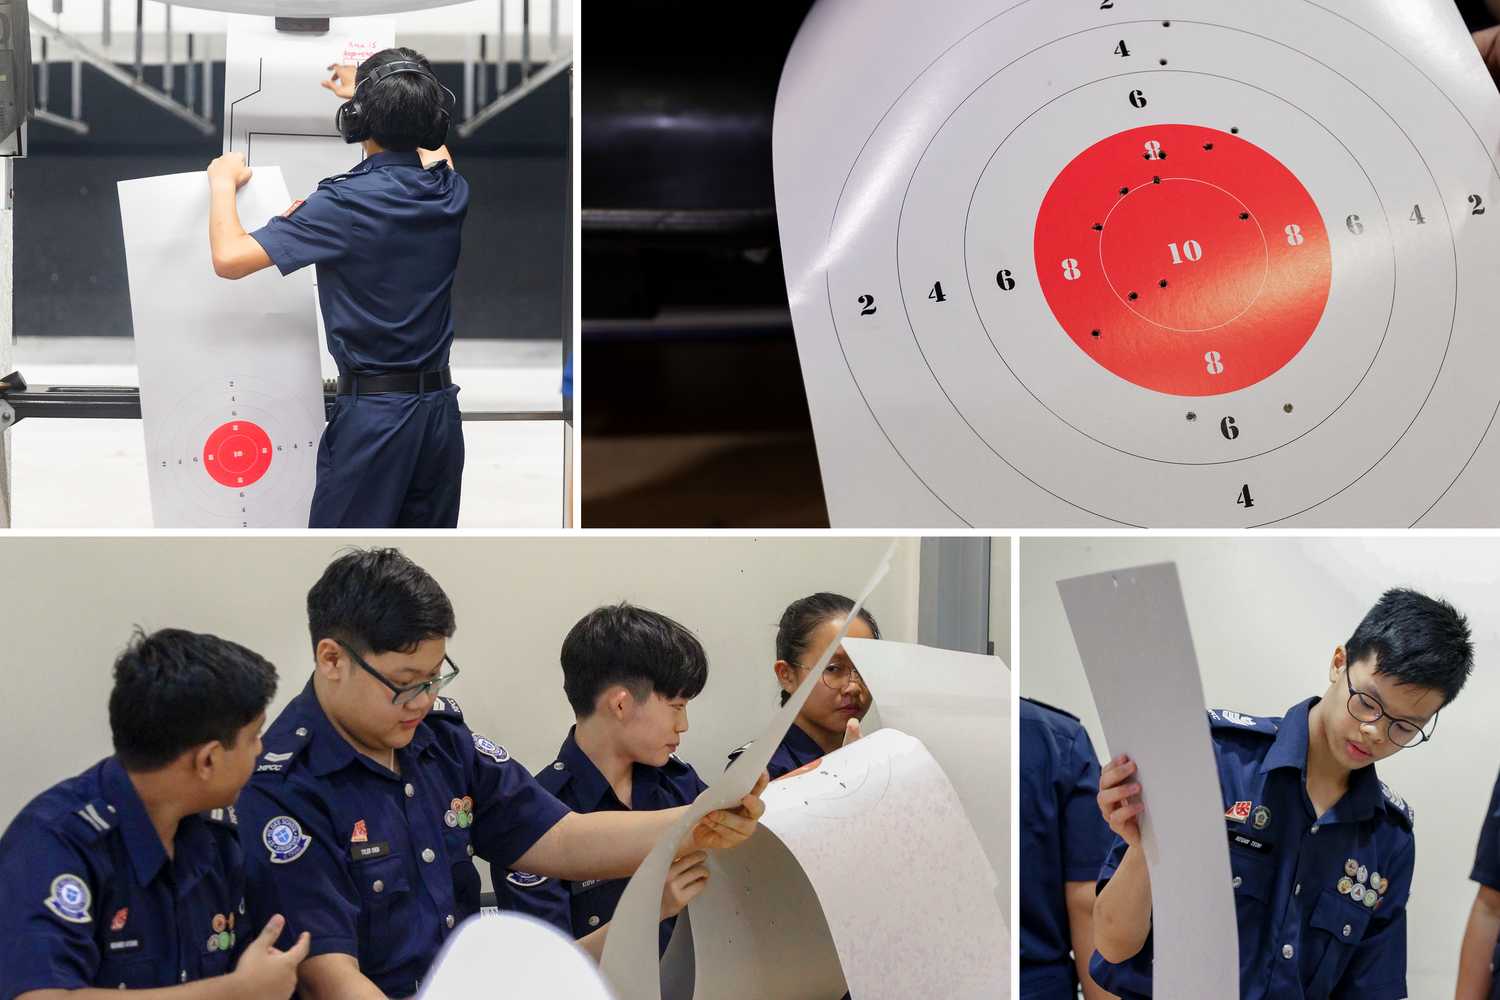 4 photos merged, 2 on top, 2 below. Top right is of bullseye target with bullet holes. Top left is of male Cadet removing his bullseye target from range. Bottom right is of male Cadet counting his points. Bottom left is of 4 male Cadets looking at their targets and engaging in a conversation. 